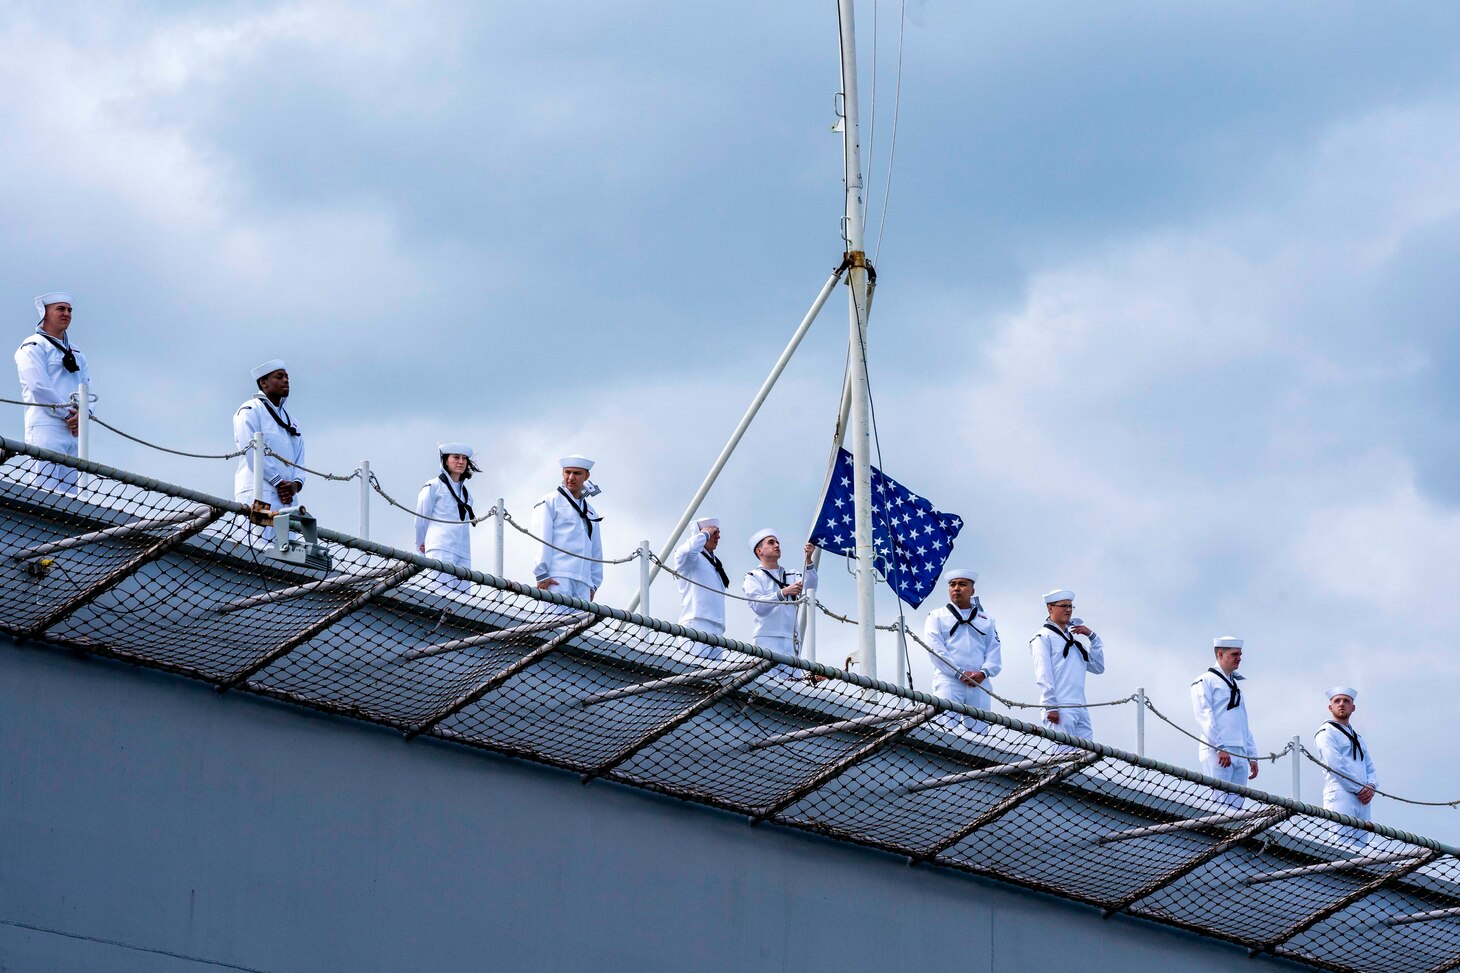 A Sailor aboard the capital ship of the Gerald R. Ford Carrier Strike Group (GRFCSG), the first-in-class aircraft carrier USS Gerald R. Ford (CVN 78), lowers the Union Jack prior to departing Naval Station Norfolk for a routine deployment, May 2.